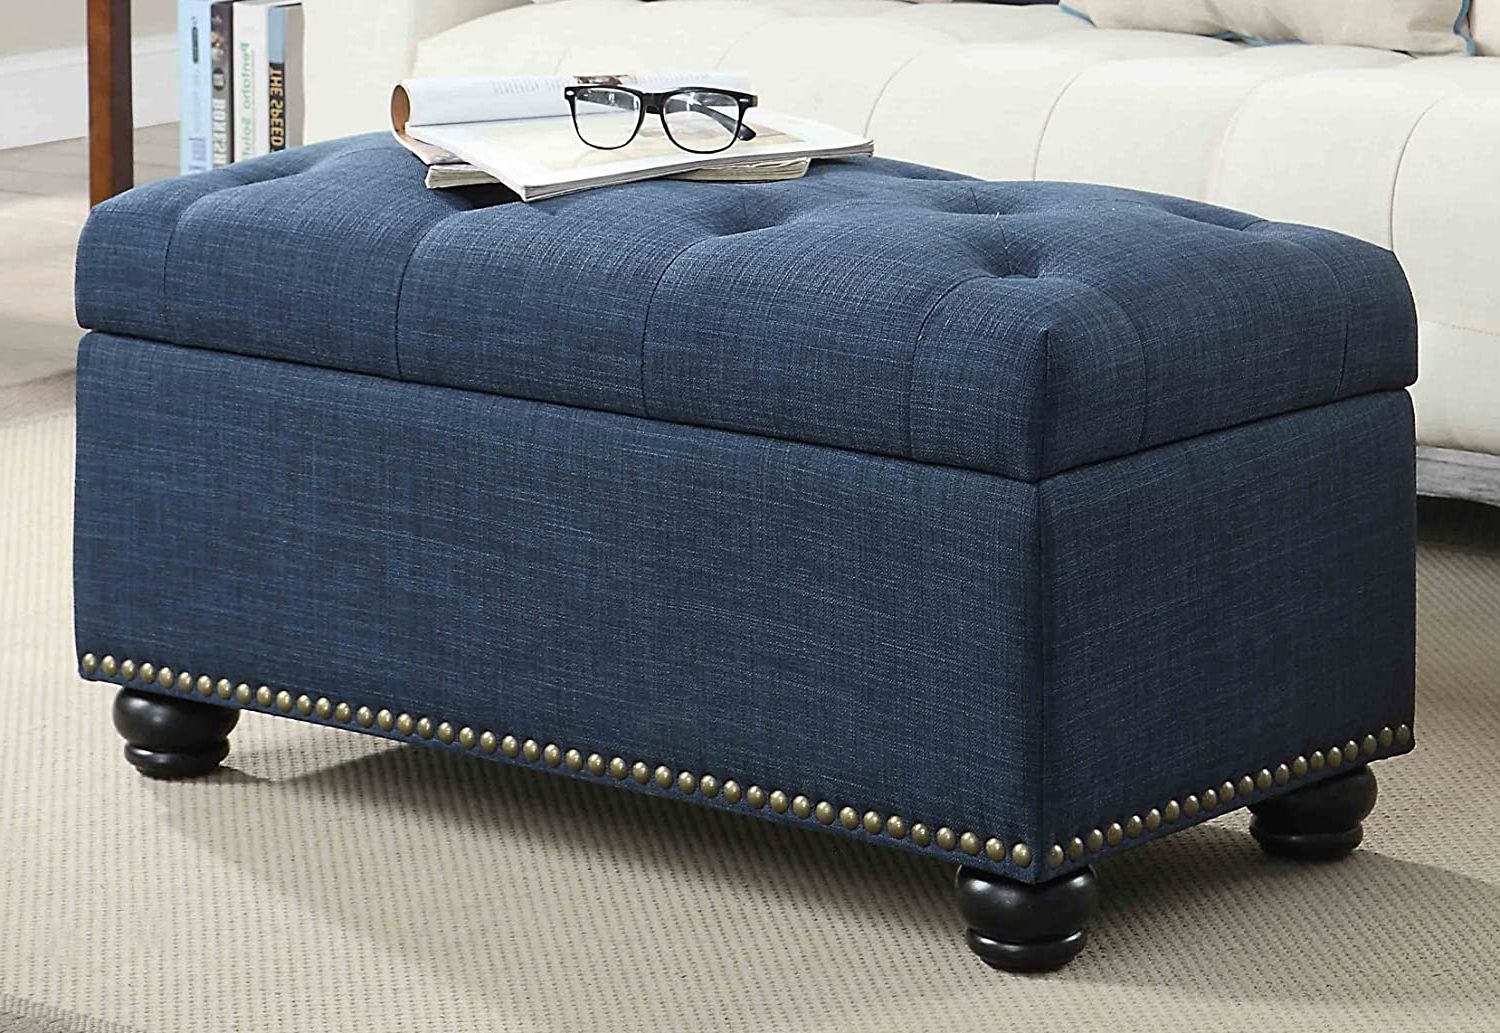 Lavender Fabric Storage Ottomans With Well Known Convenience Concepts Designs4comfort 7th Avenue Storage Ottoman, Blue (View 5 of 10)